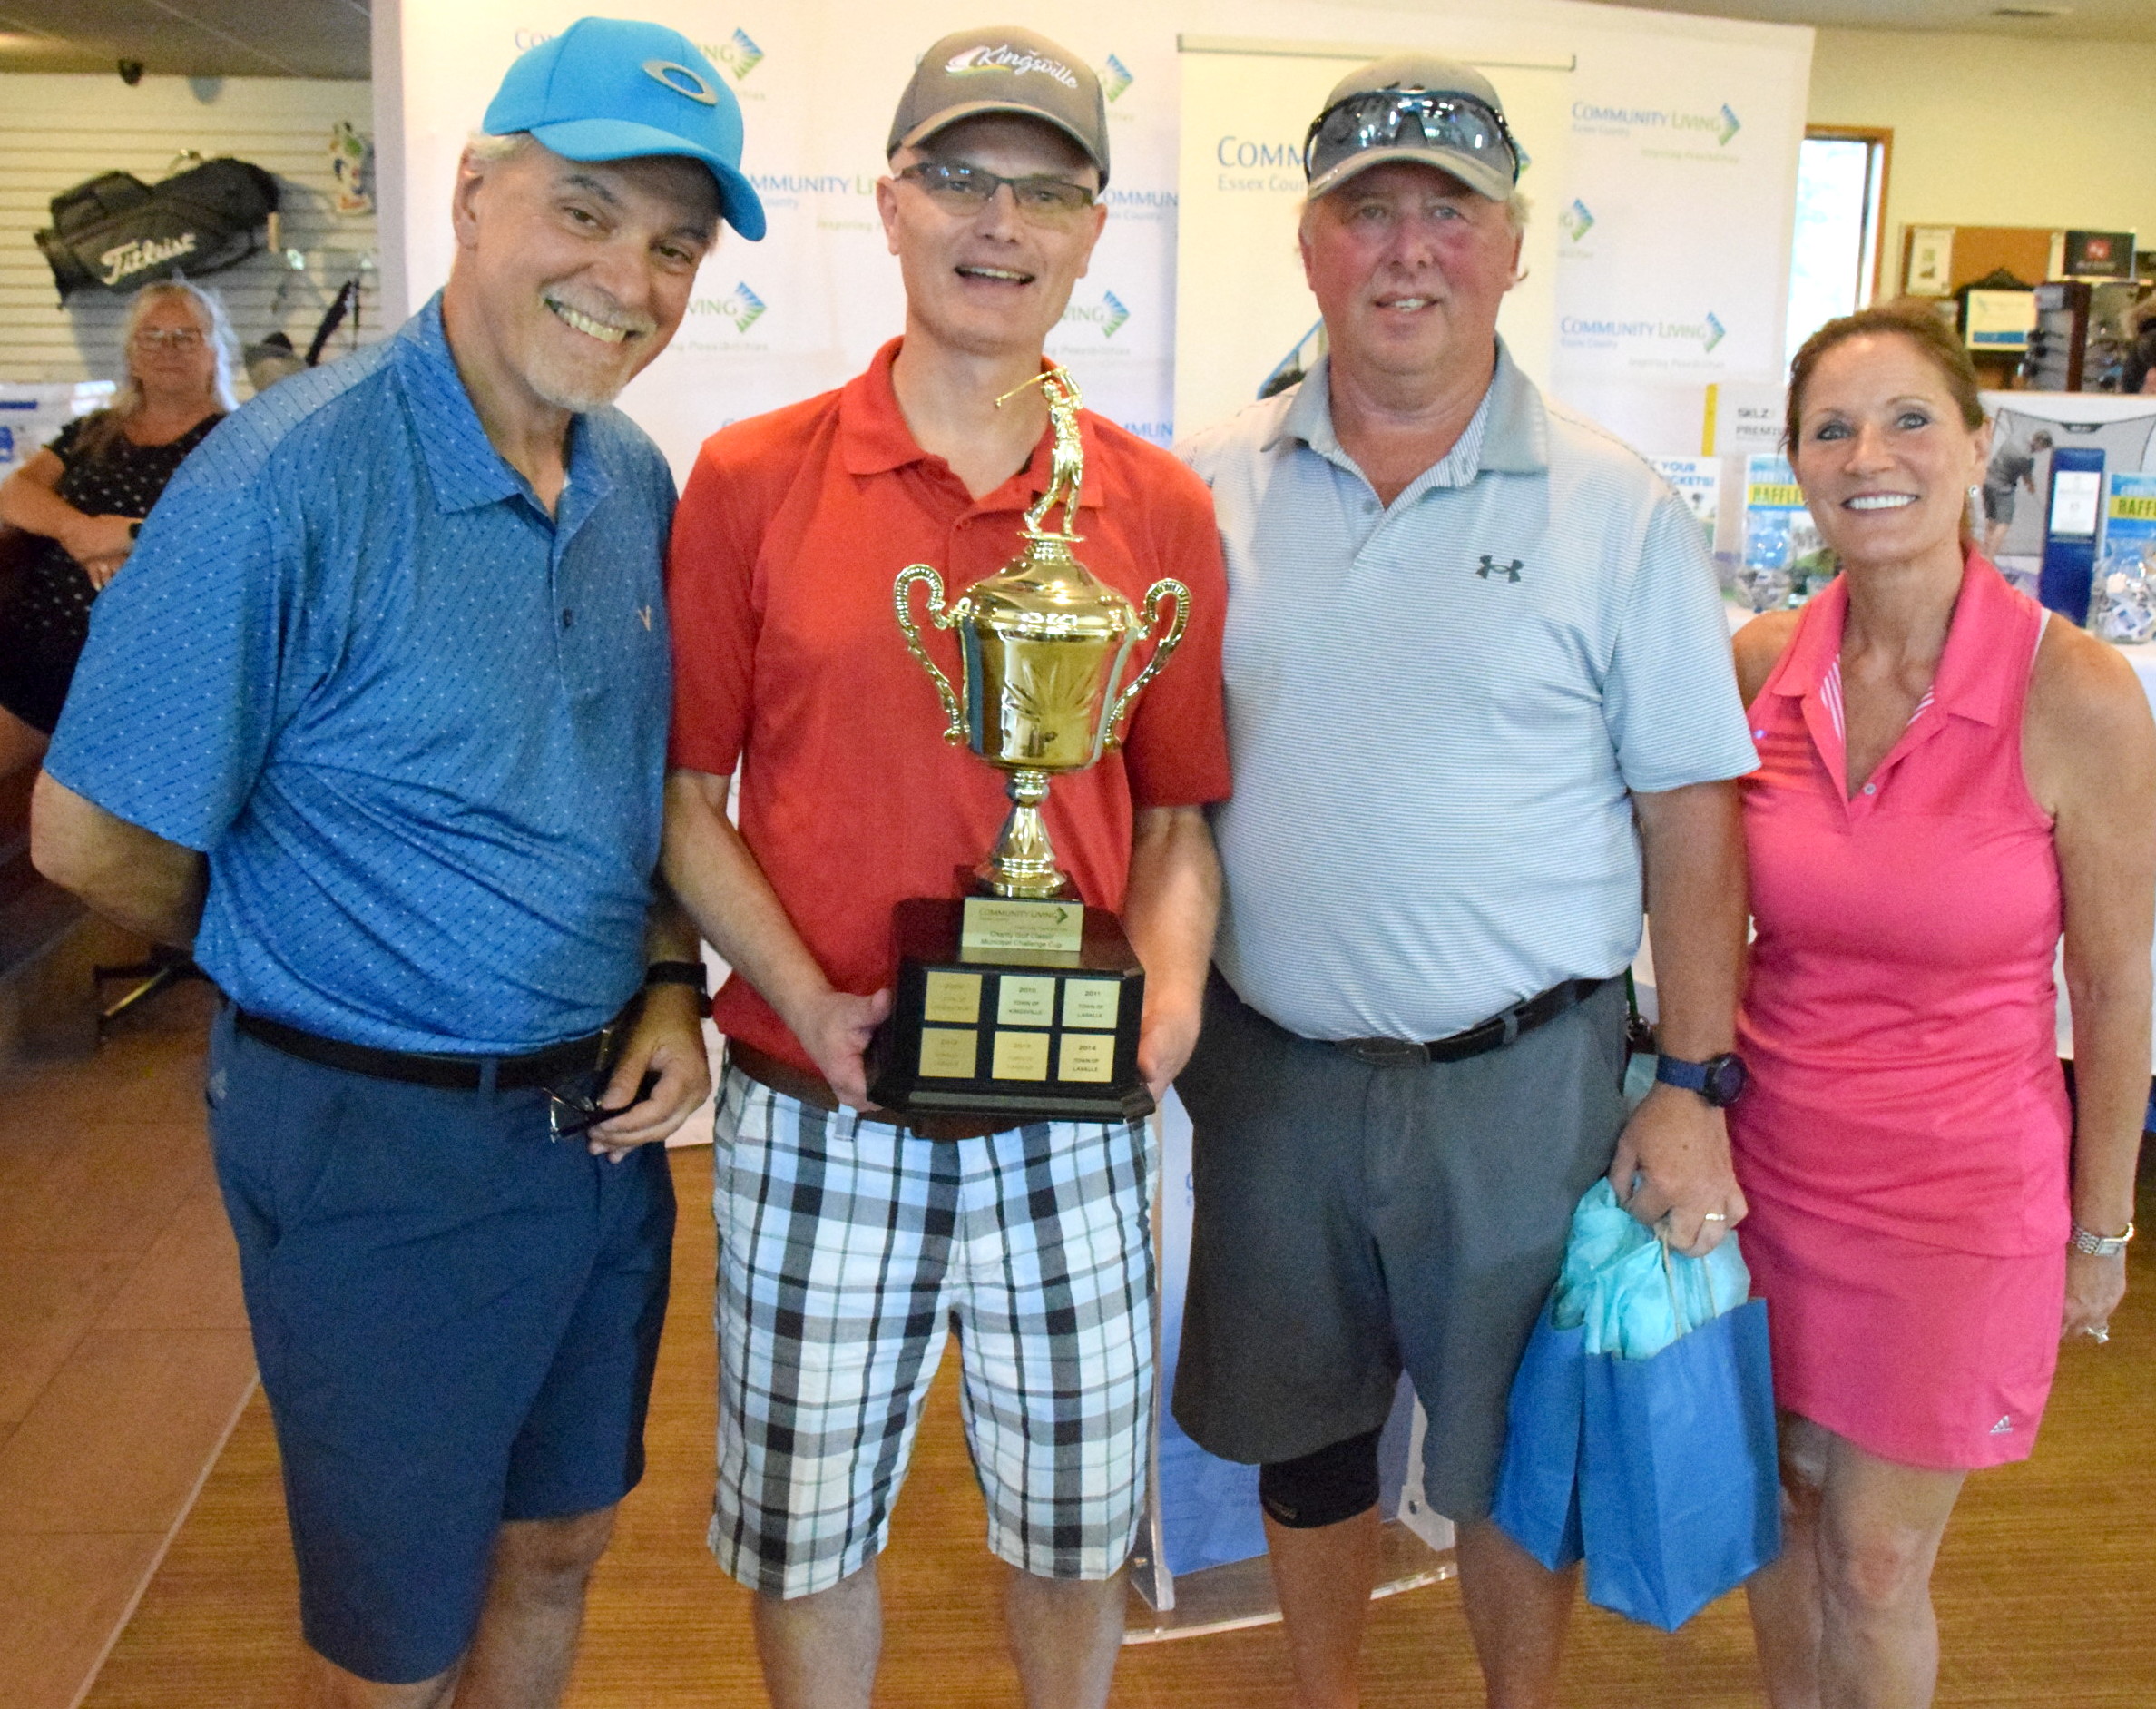 Tony DeSantis and Karen Bolger of Community Living Essex County present the municipal cup challenge winners with the trophy.